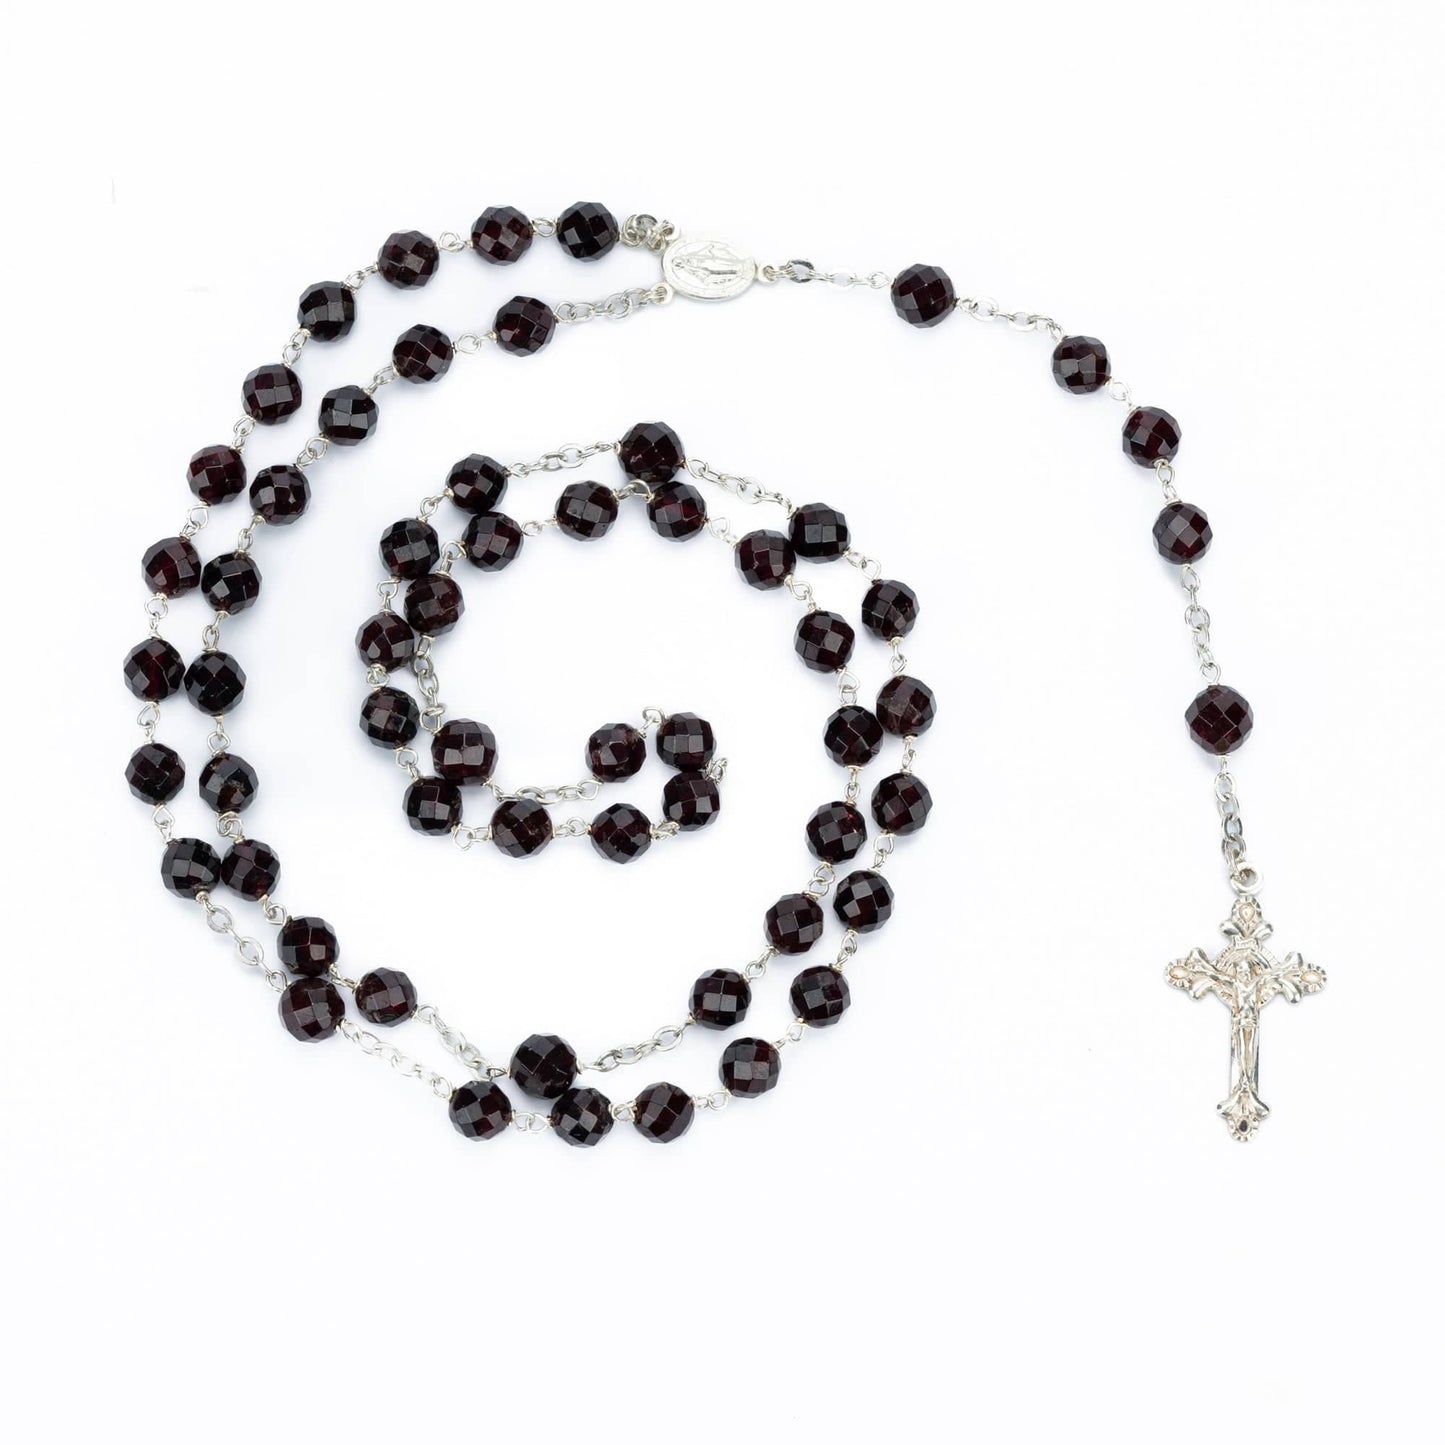 MONDO CATTOLICO Prayer Beads GRENADE FACETED STERLING SILVER ROSARY